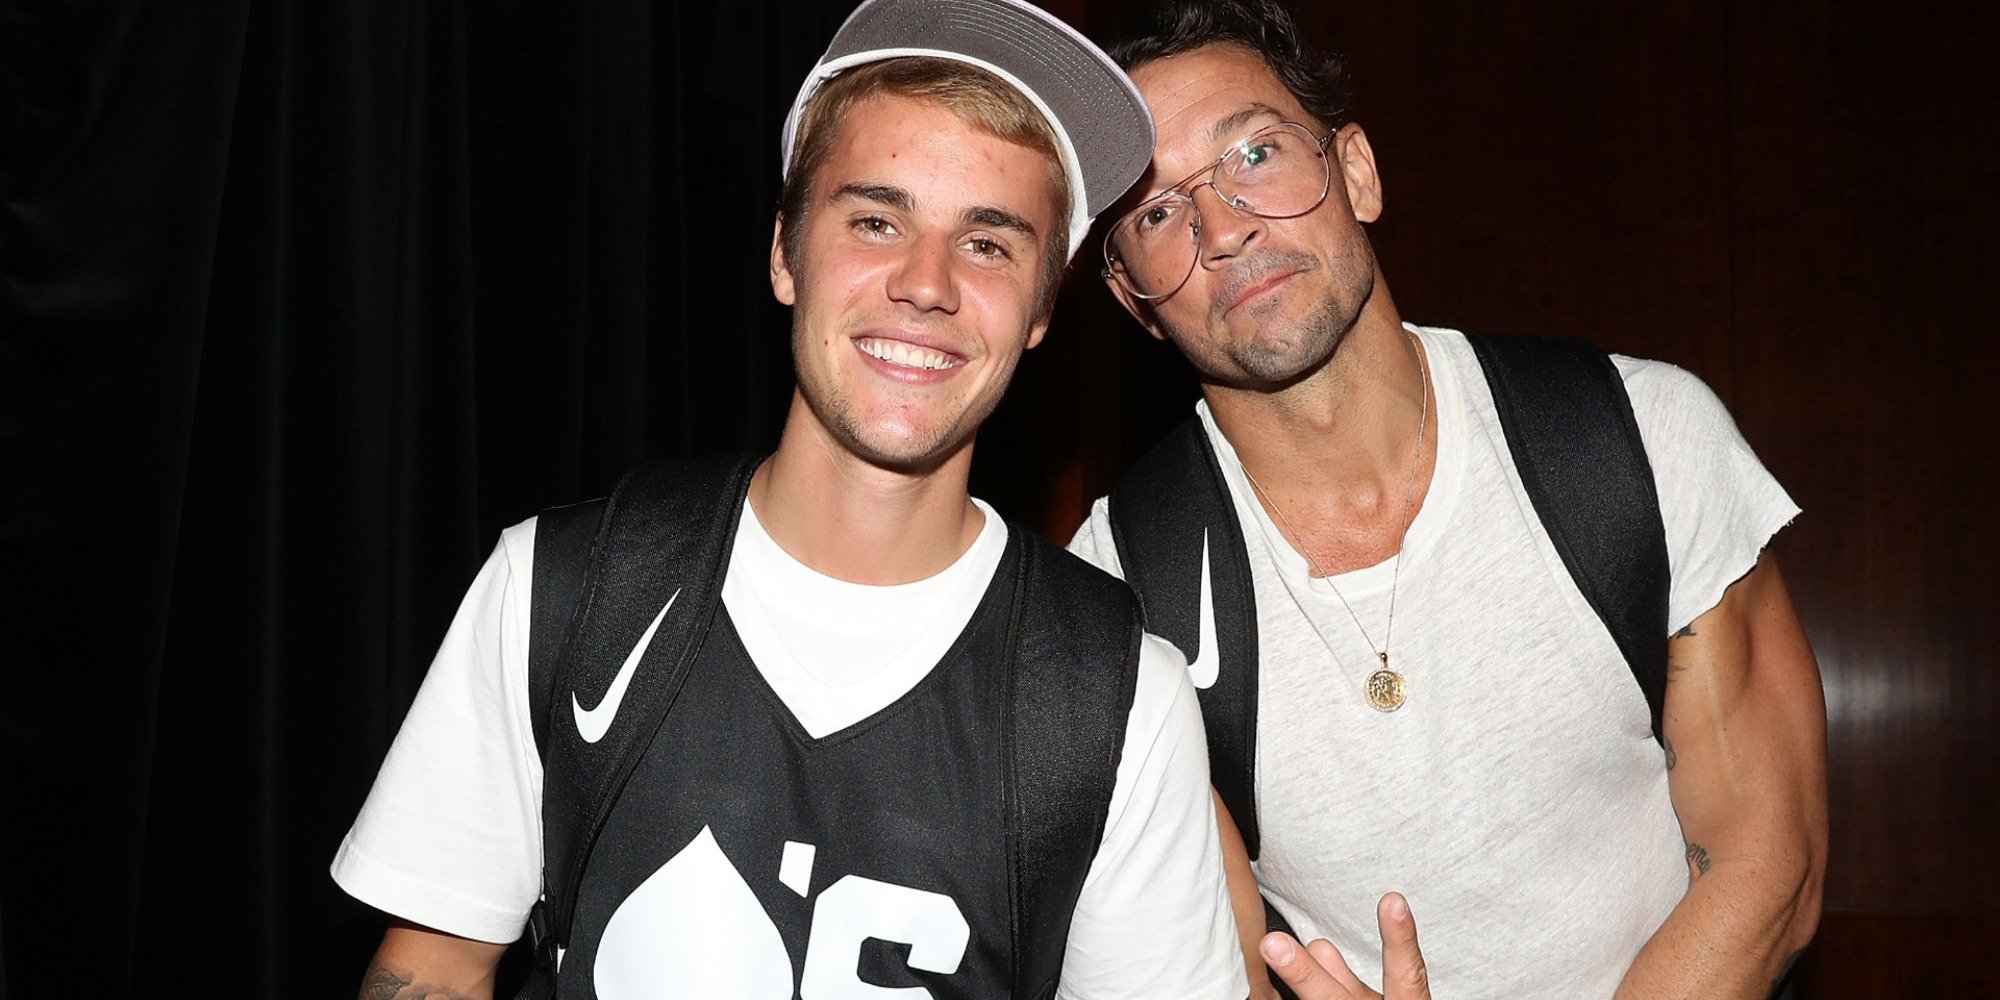 Justin Bieber and Carl Lentz pose for photographers.